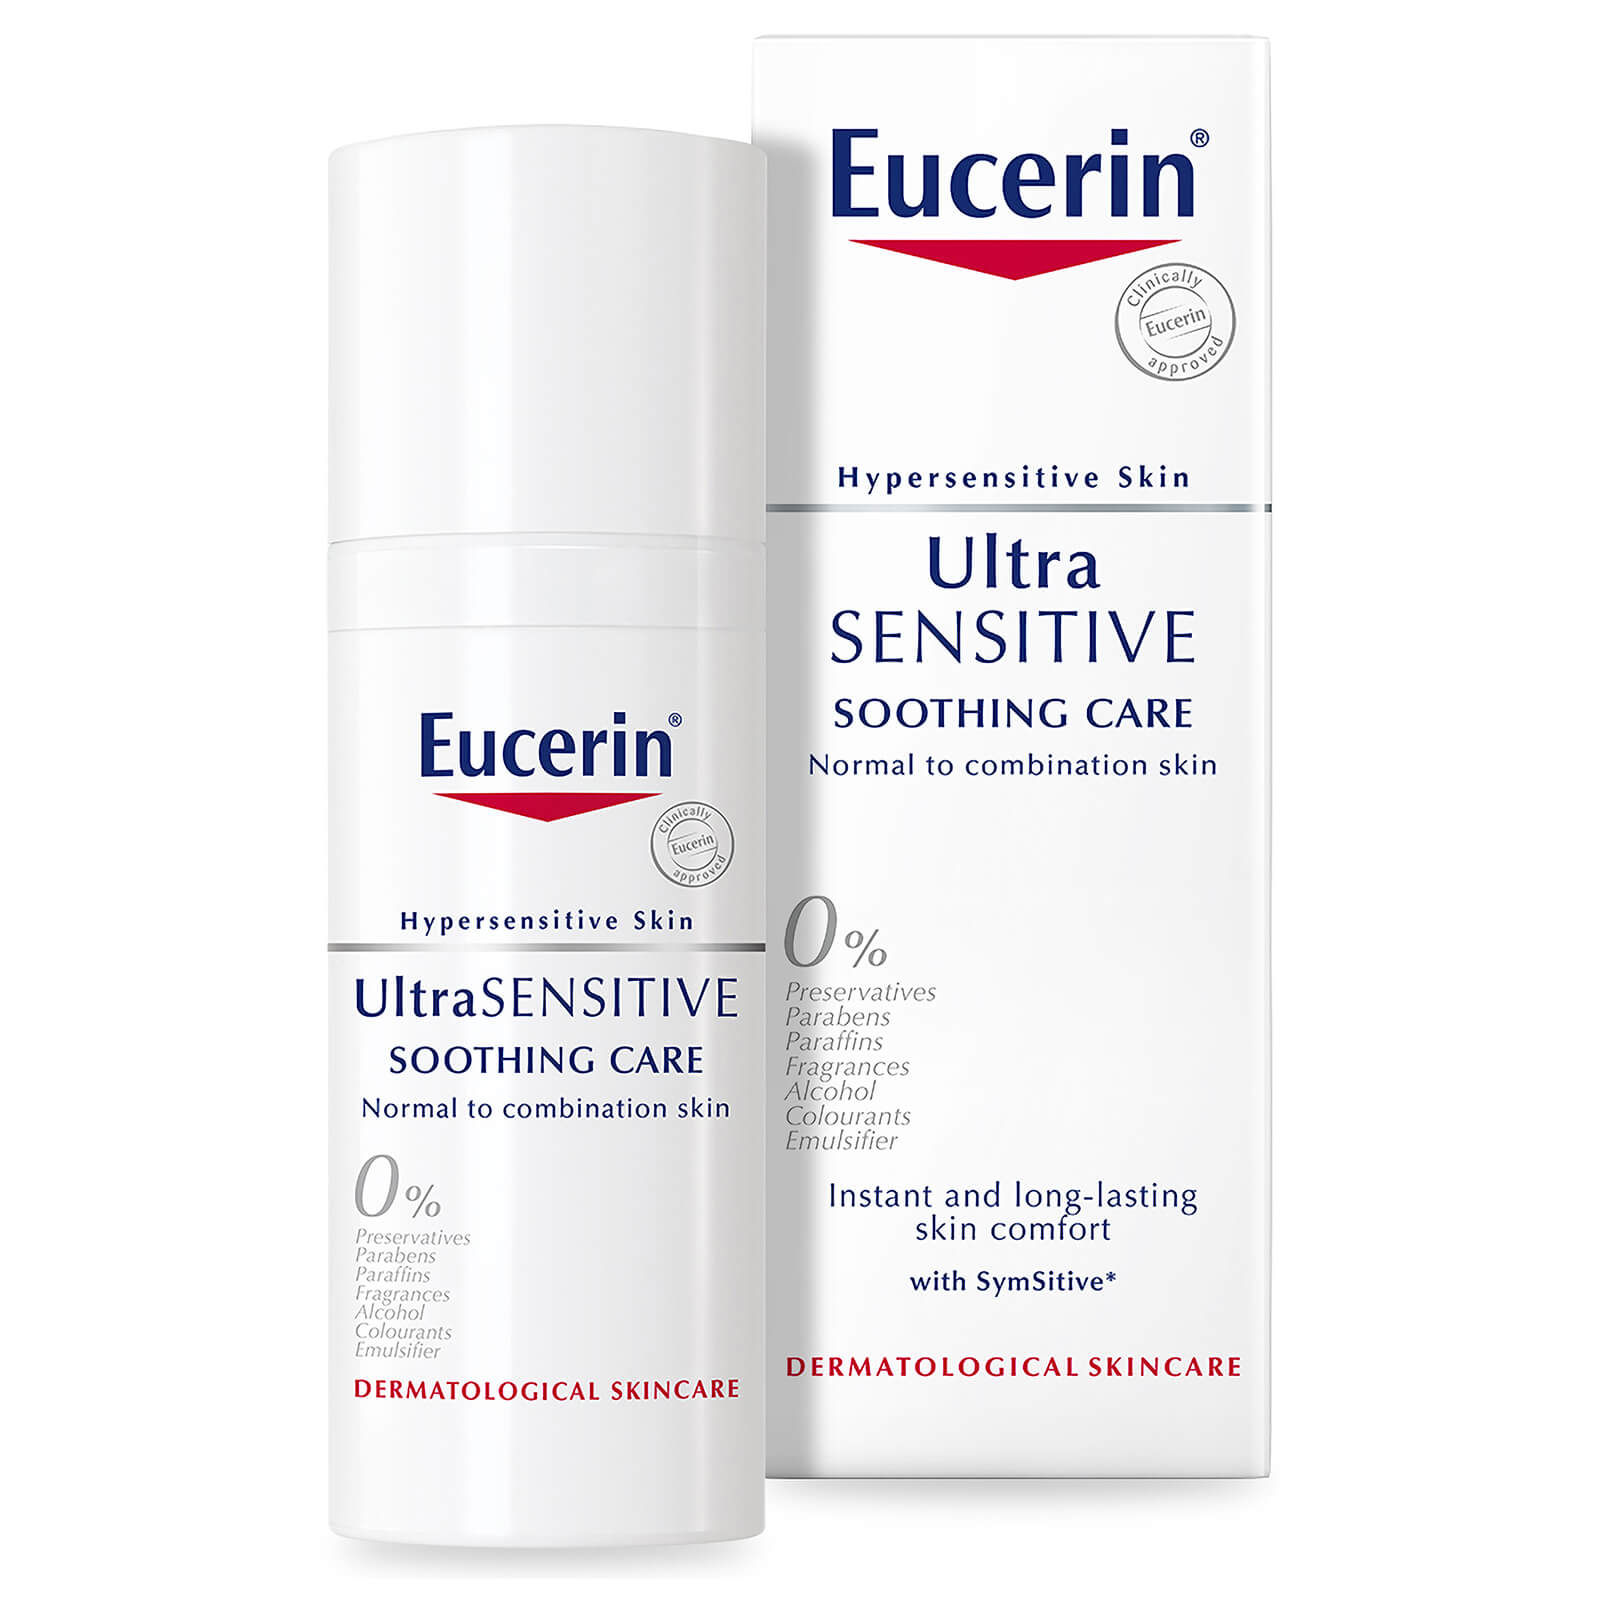 Photos - Cream / Lotion Eucerin UltraSensitive Soothing Care for Normal/Combination Skin 50ml 6974 